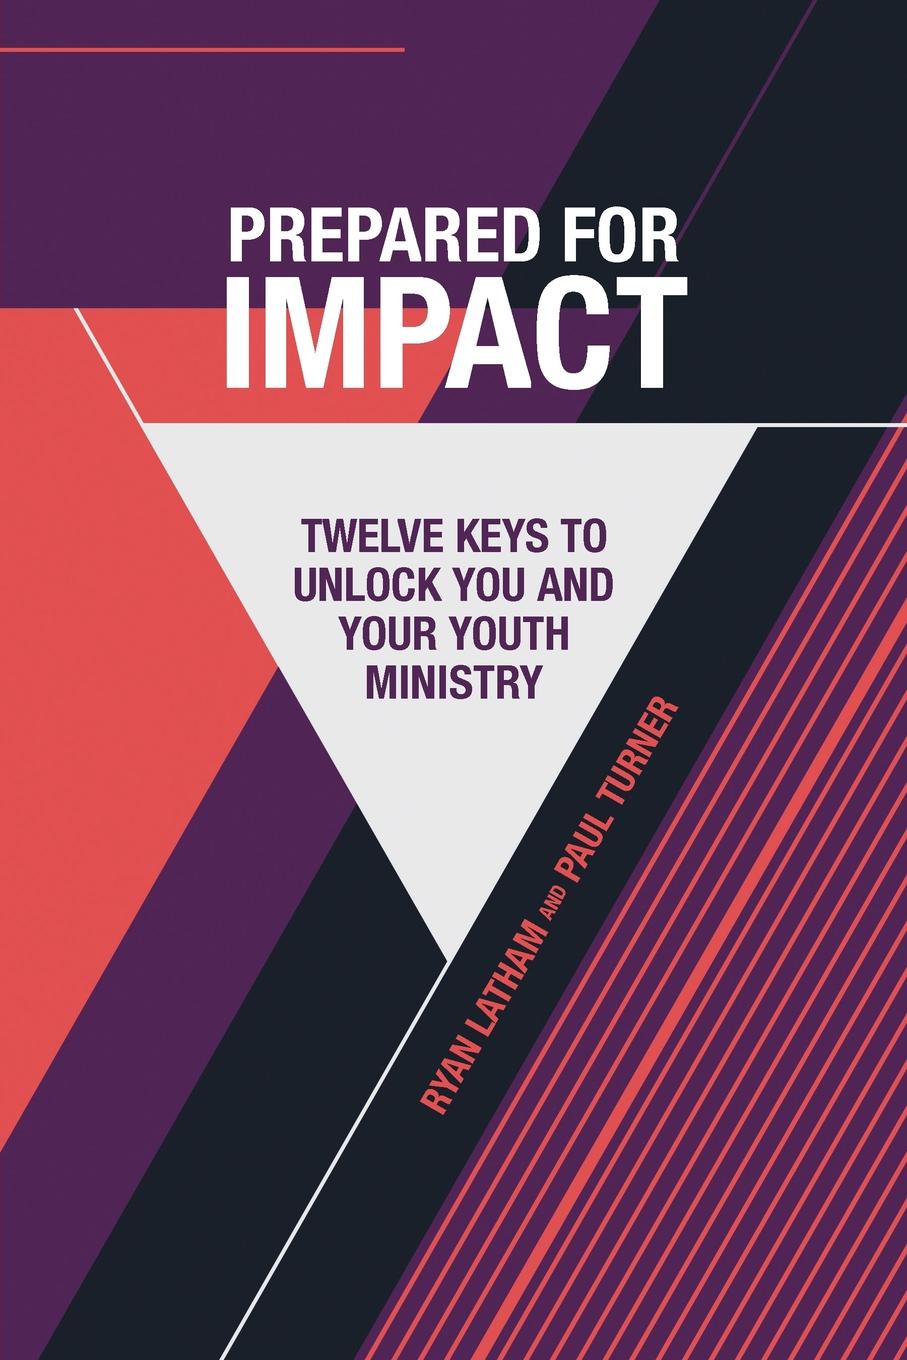 Prepared For Impact. Twelve Keys to Unlock You and Your Youth Ministry